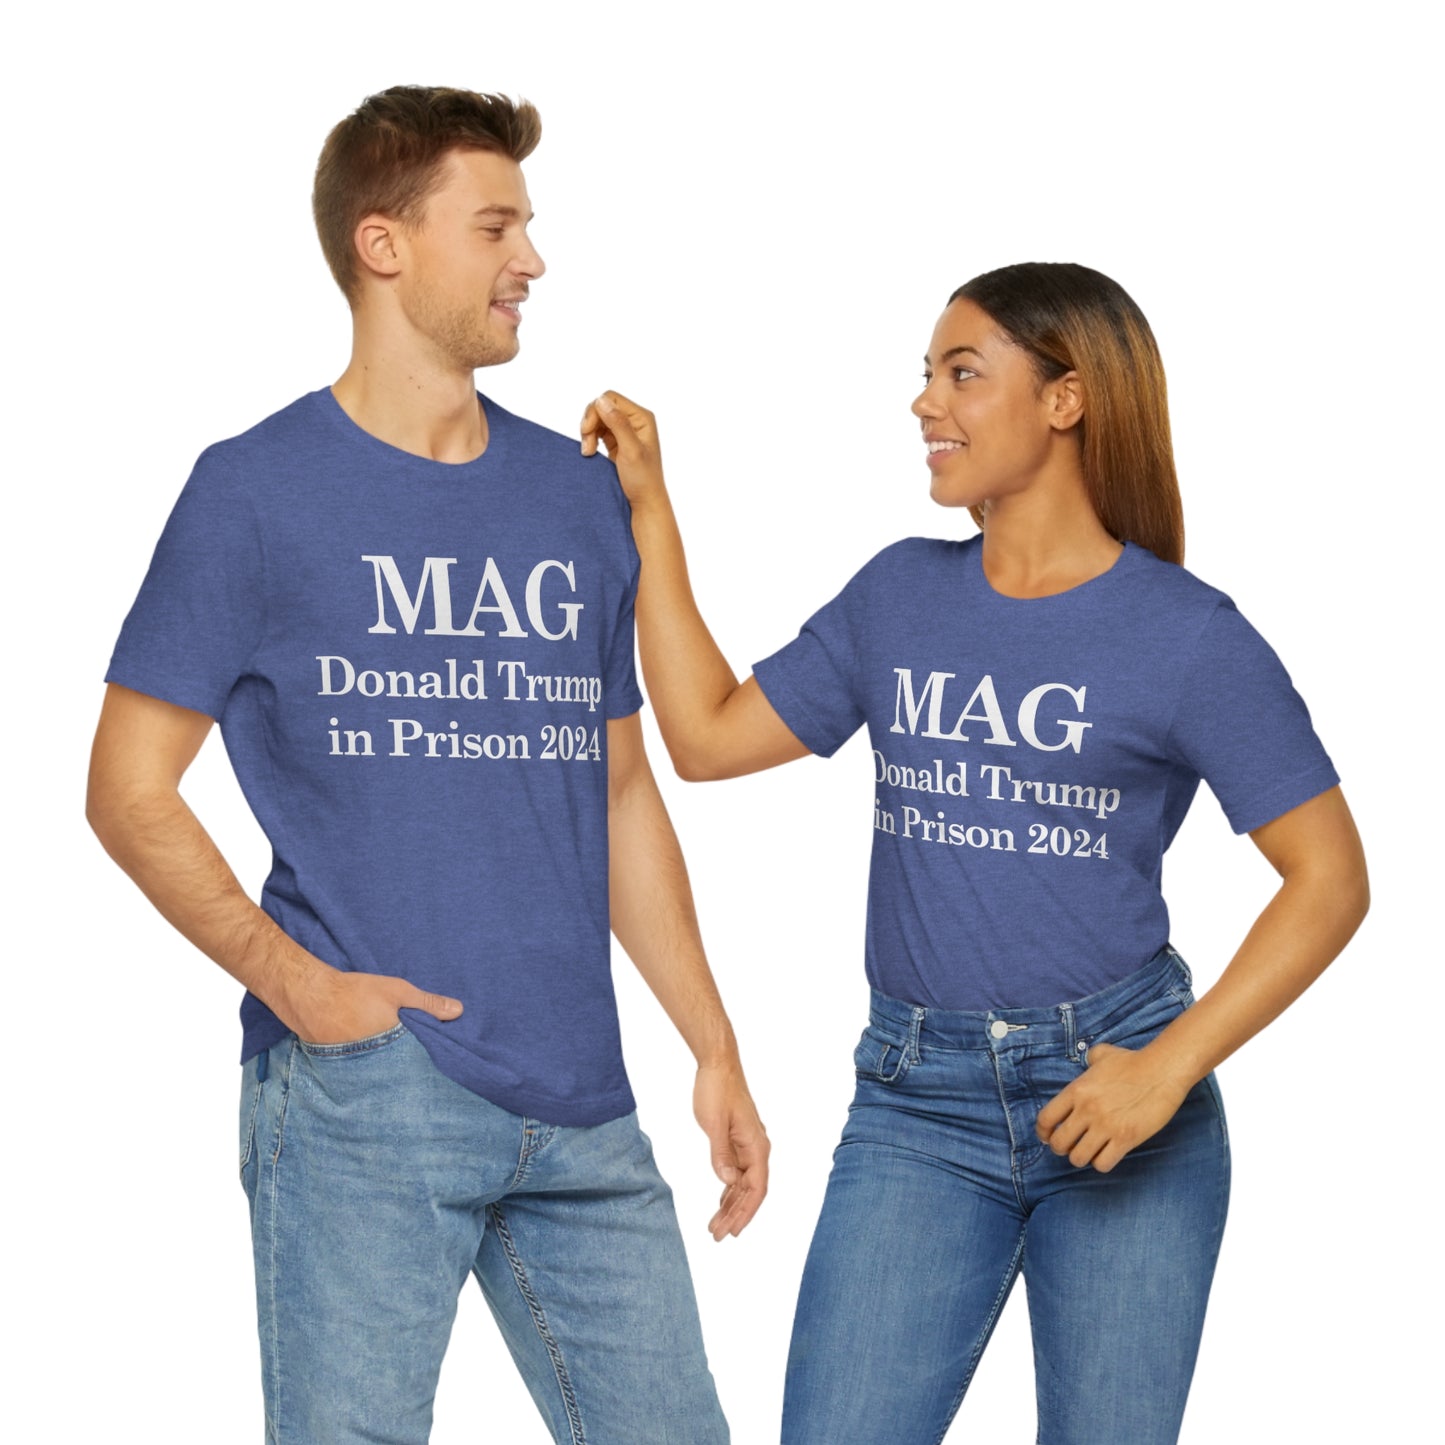 MAG: Donald Trump in Prison by 2024 Unisex Jersey Short Sleeve Blue/Red Tee (SirTalksALot Exclusive)